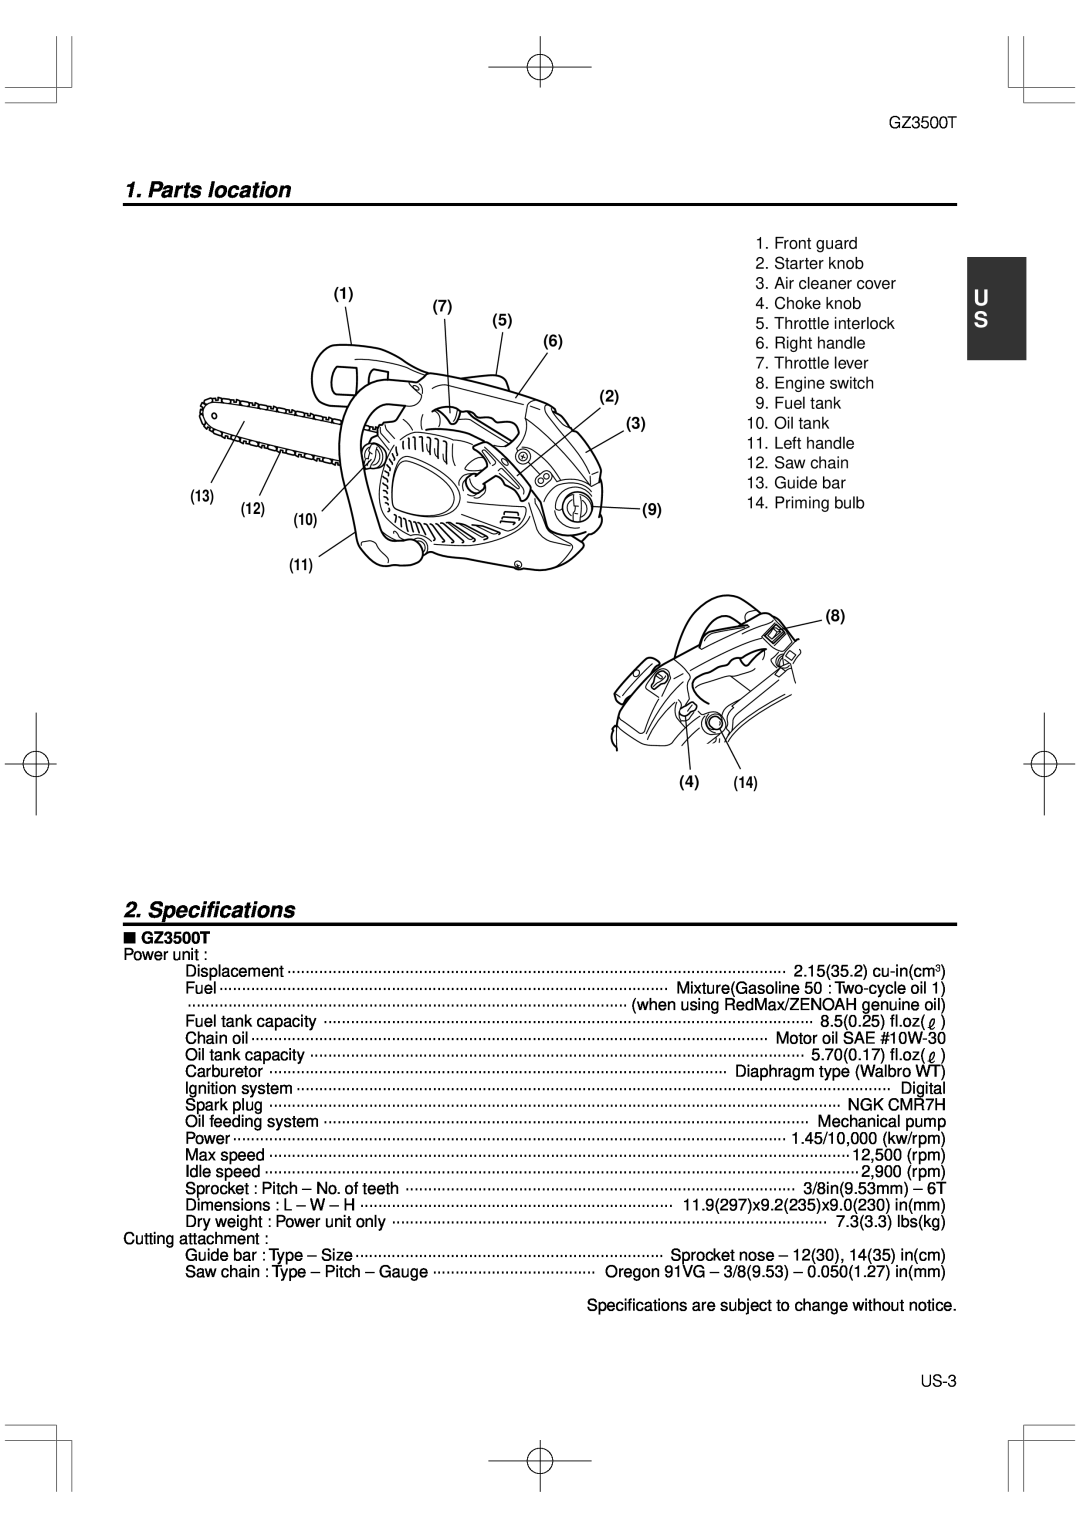 RedMax manual Parts location, Specifications, GZ3500T Power unit 